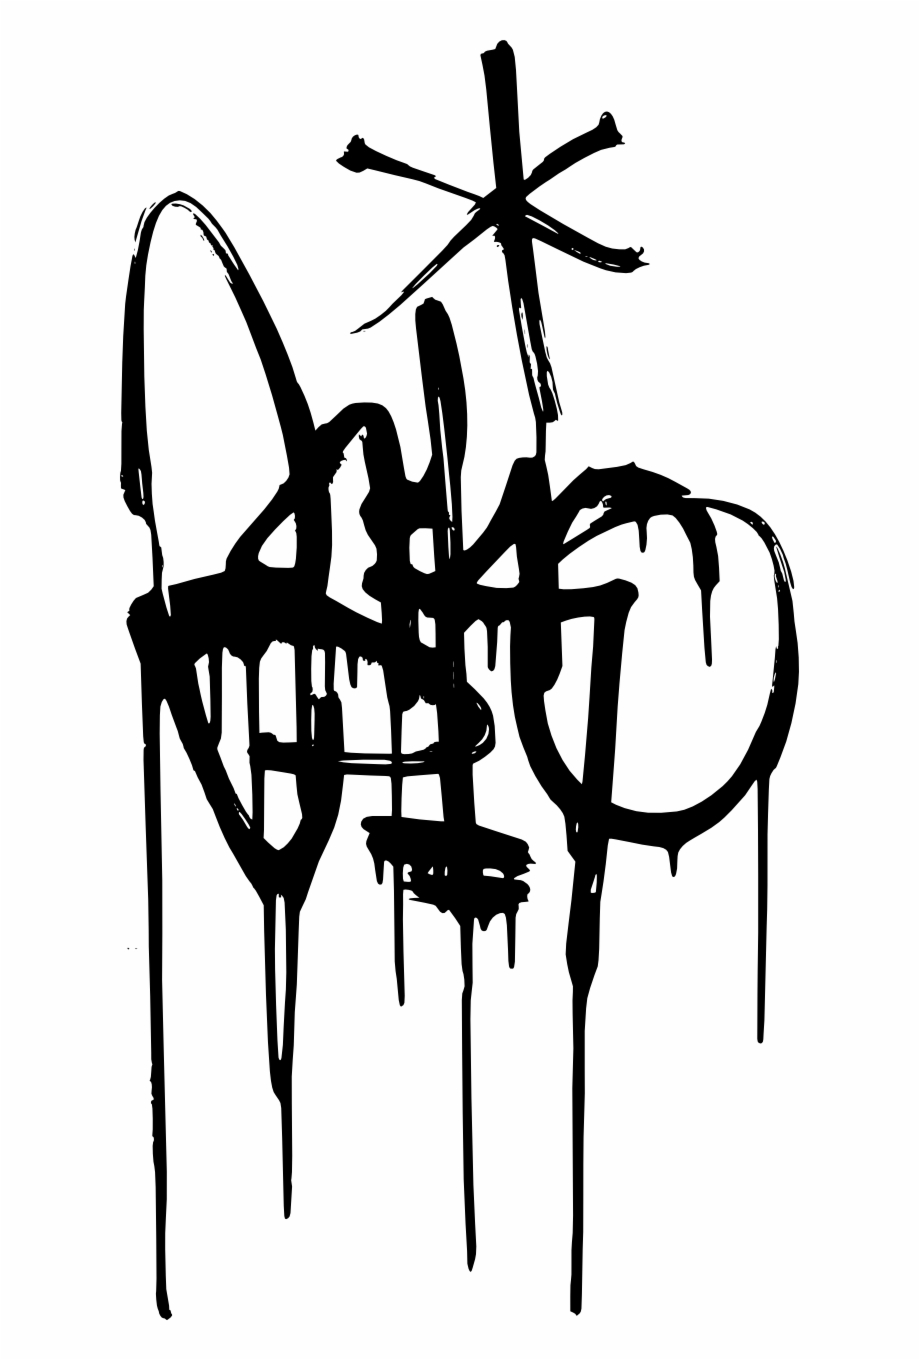 Free Spray Paint Drips Png, Download Free Spray Paint Drips Png png ...